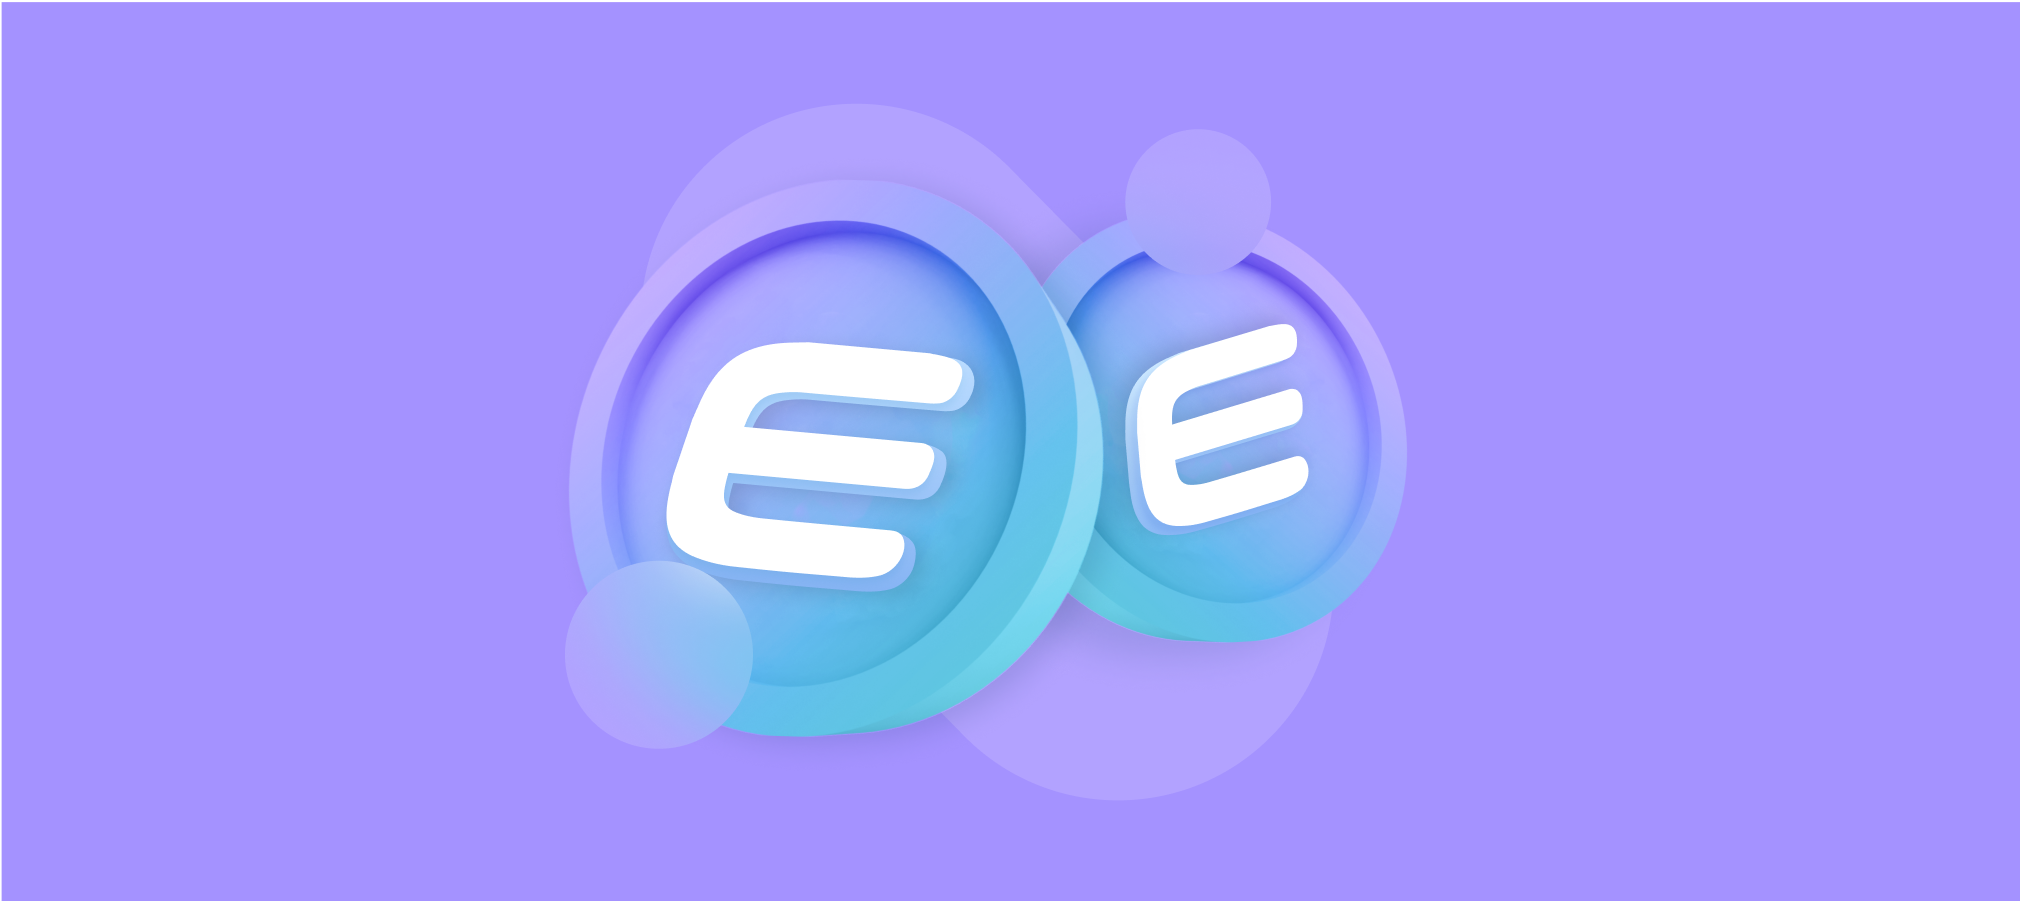 What Is Enjin Coin?